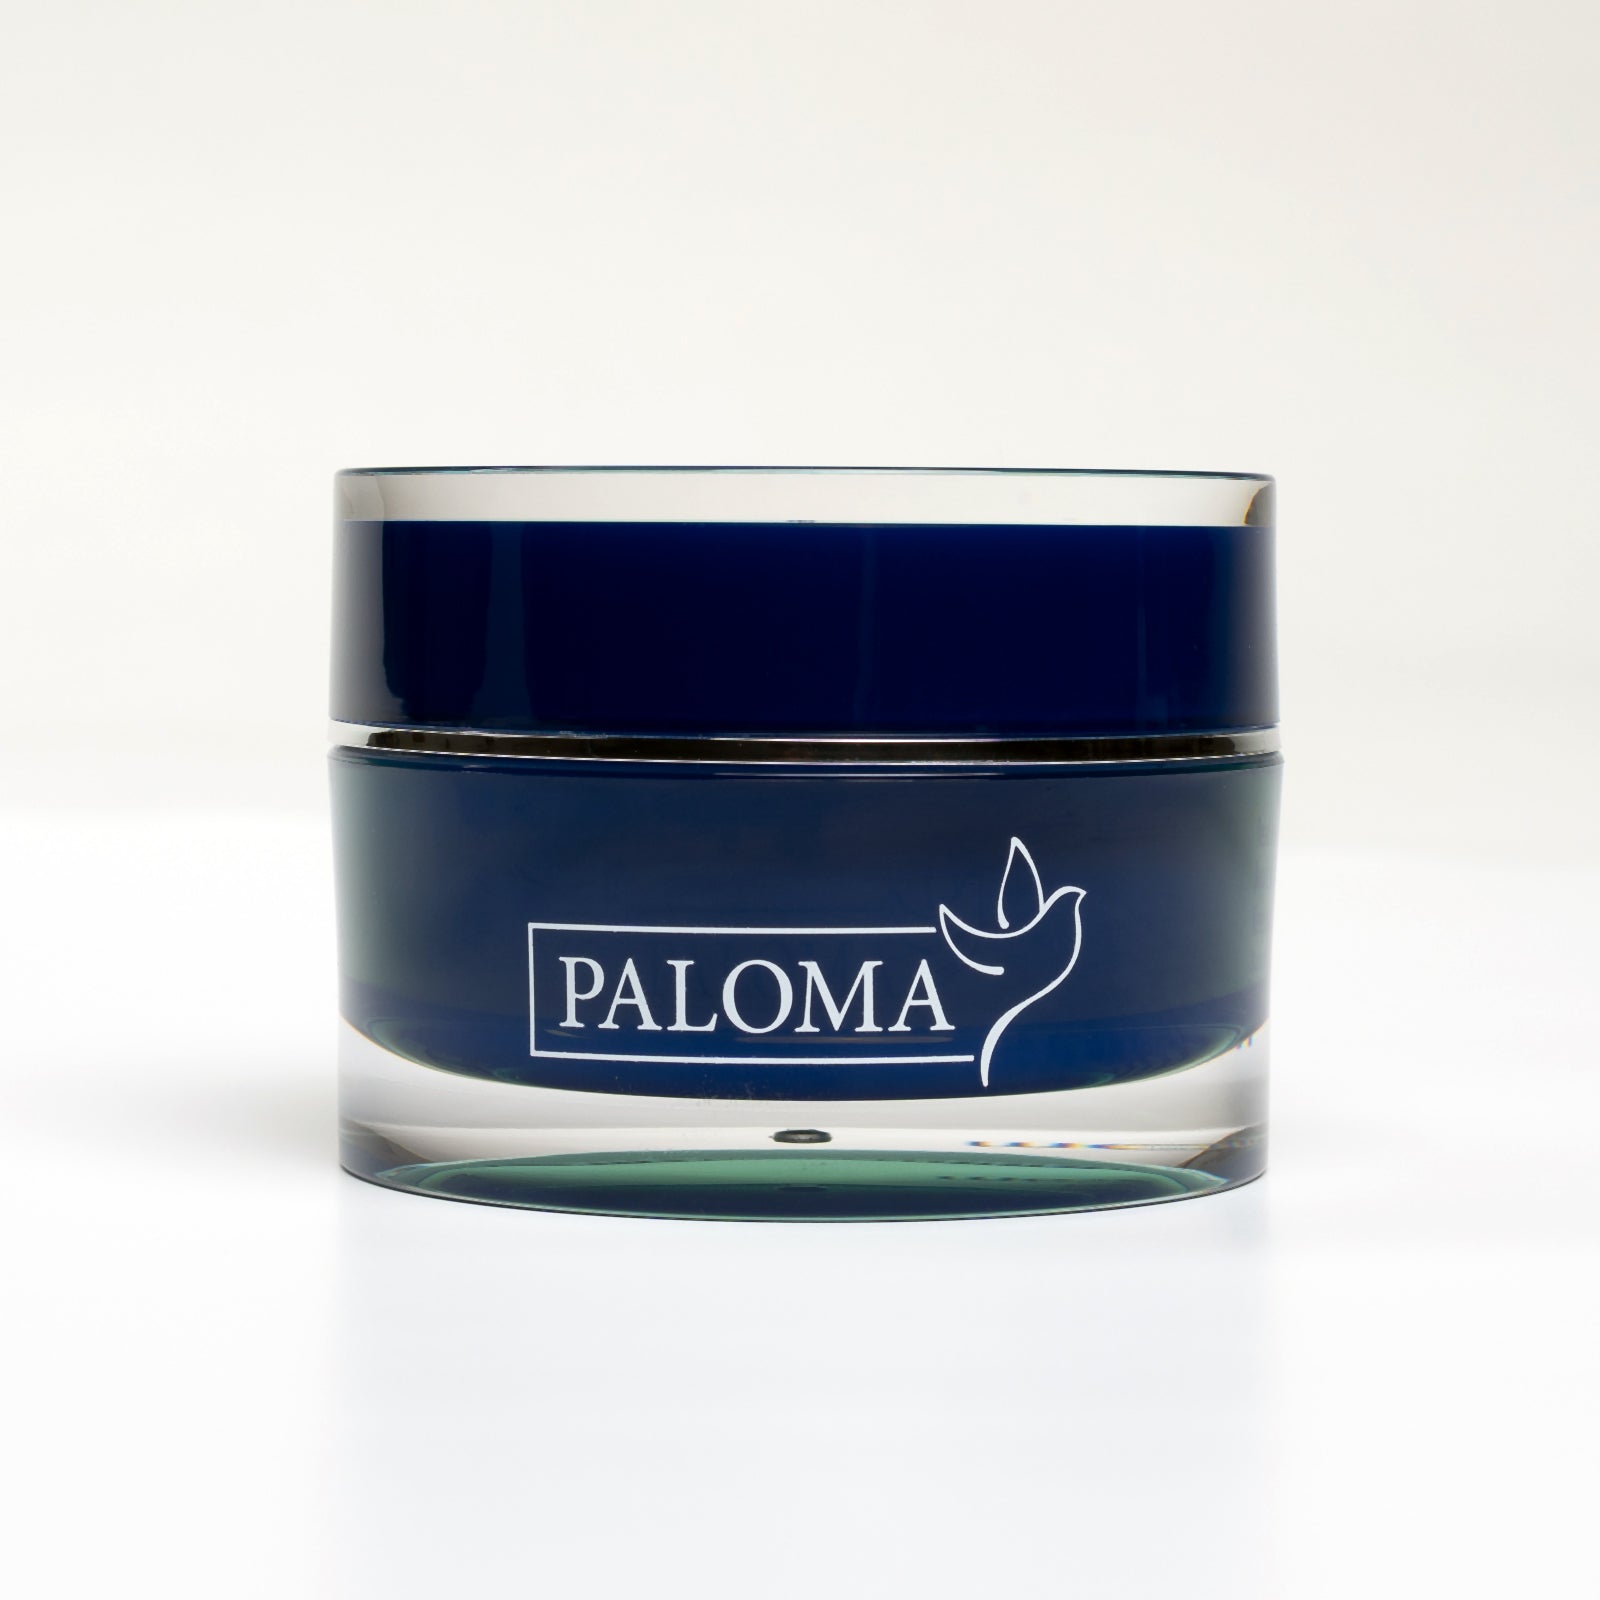 A frontal view of a refined, transparent jar topped with a deep blue lid, prominently featuring the name &#39;PALOMA&#39; in elegant white typography accompanied by a stylized dove logo. Inside the jar lies the renowned Paloma builder gel, designed for nail enhancements, showcased against a crisp, white backdrop that underscores the professional quality of the studio photograph.